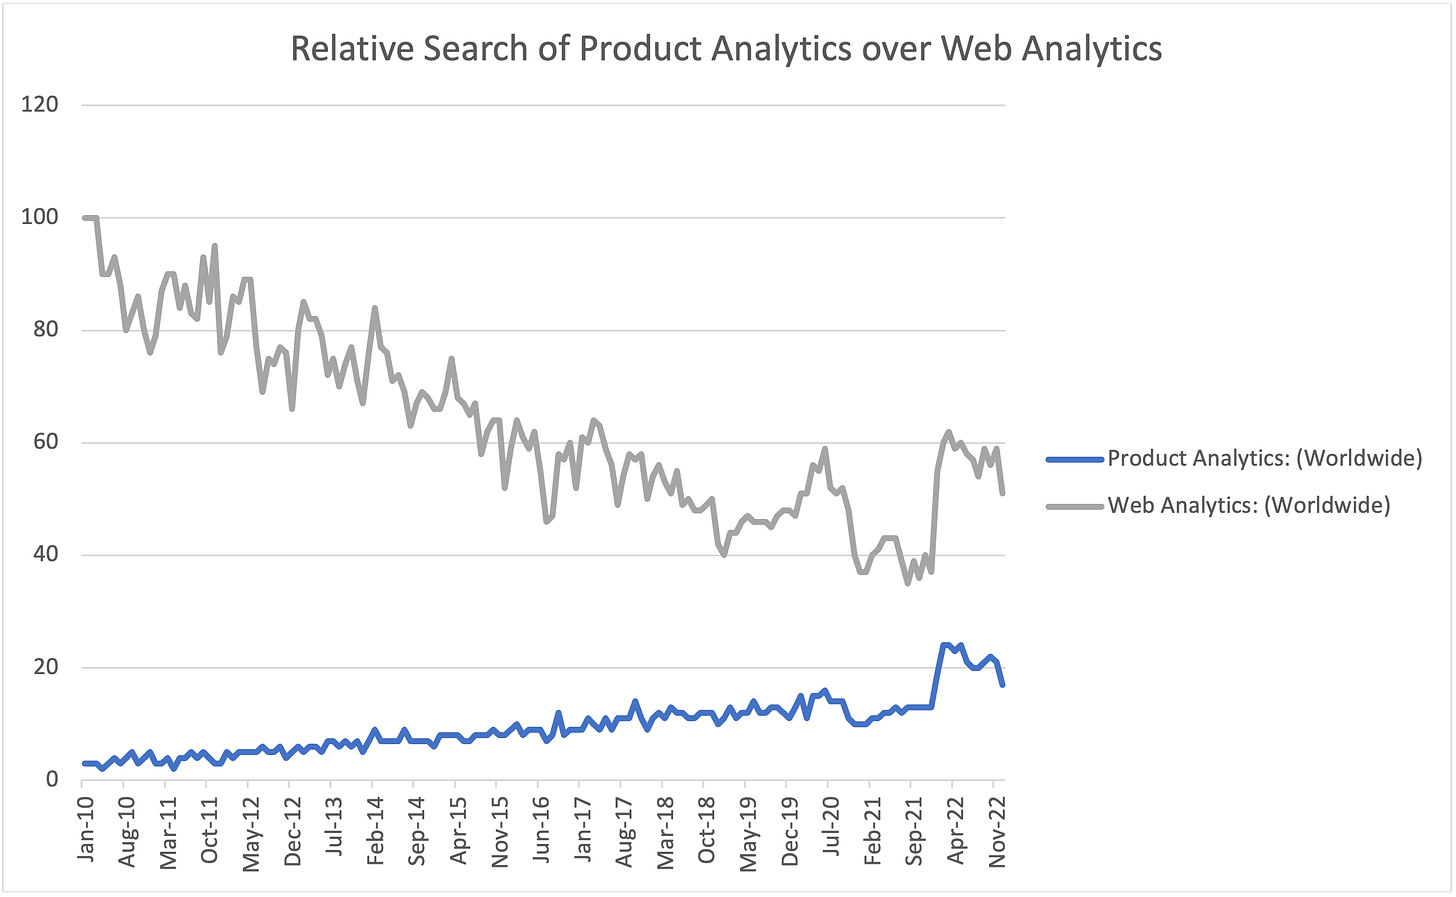 Chart showing relative interest in search terms of Web Analytics vs Product Analytics